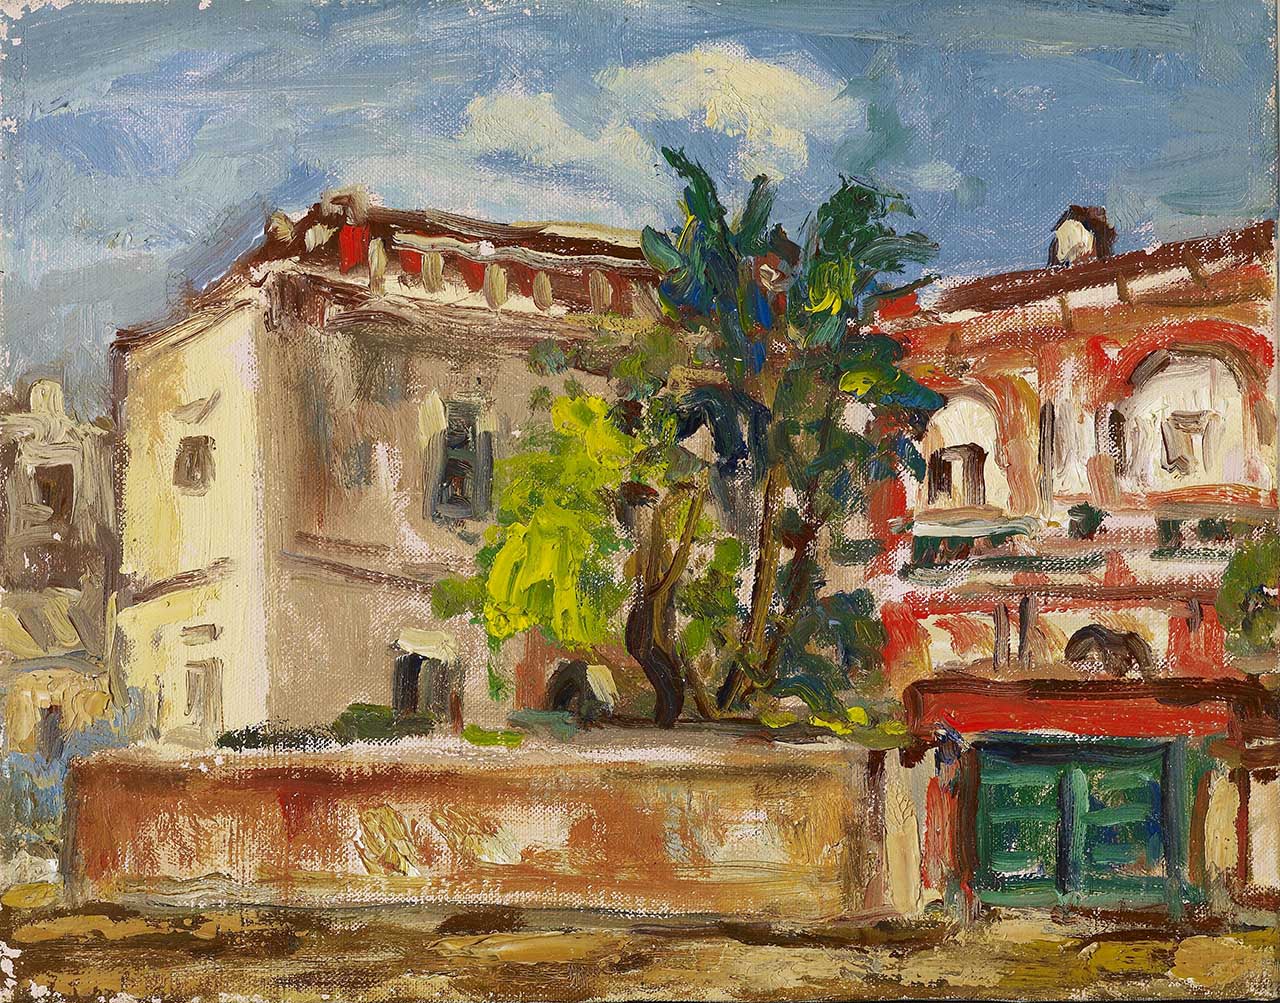 Red Mansion Oil on canvas 27.8x35.5 cm